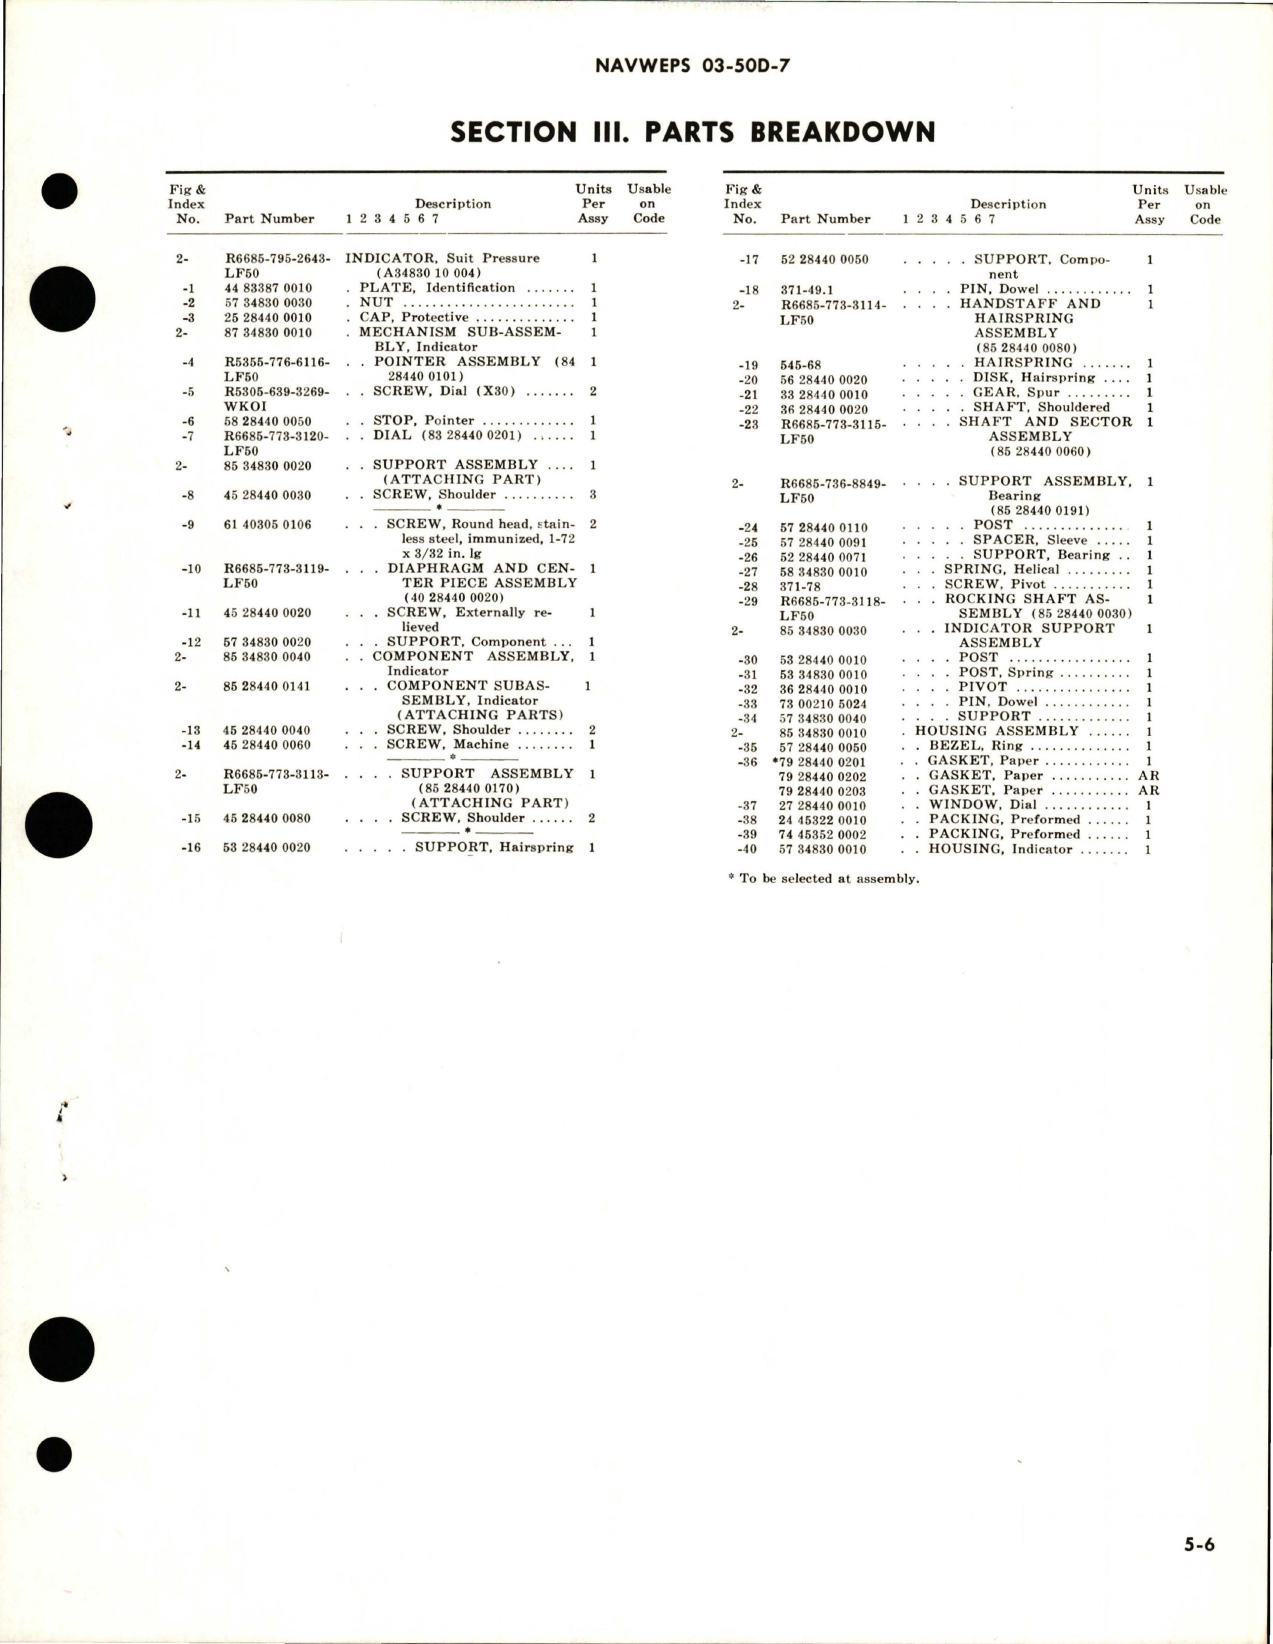 Sample page 5 from AirCorps Library document: Operation, Service and Overhaul Instructions with Parts Breakdown for Pressure Suit Indicator - Part A34830 10 004 